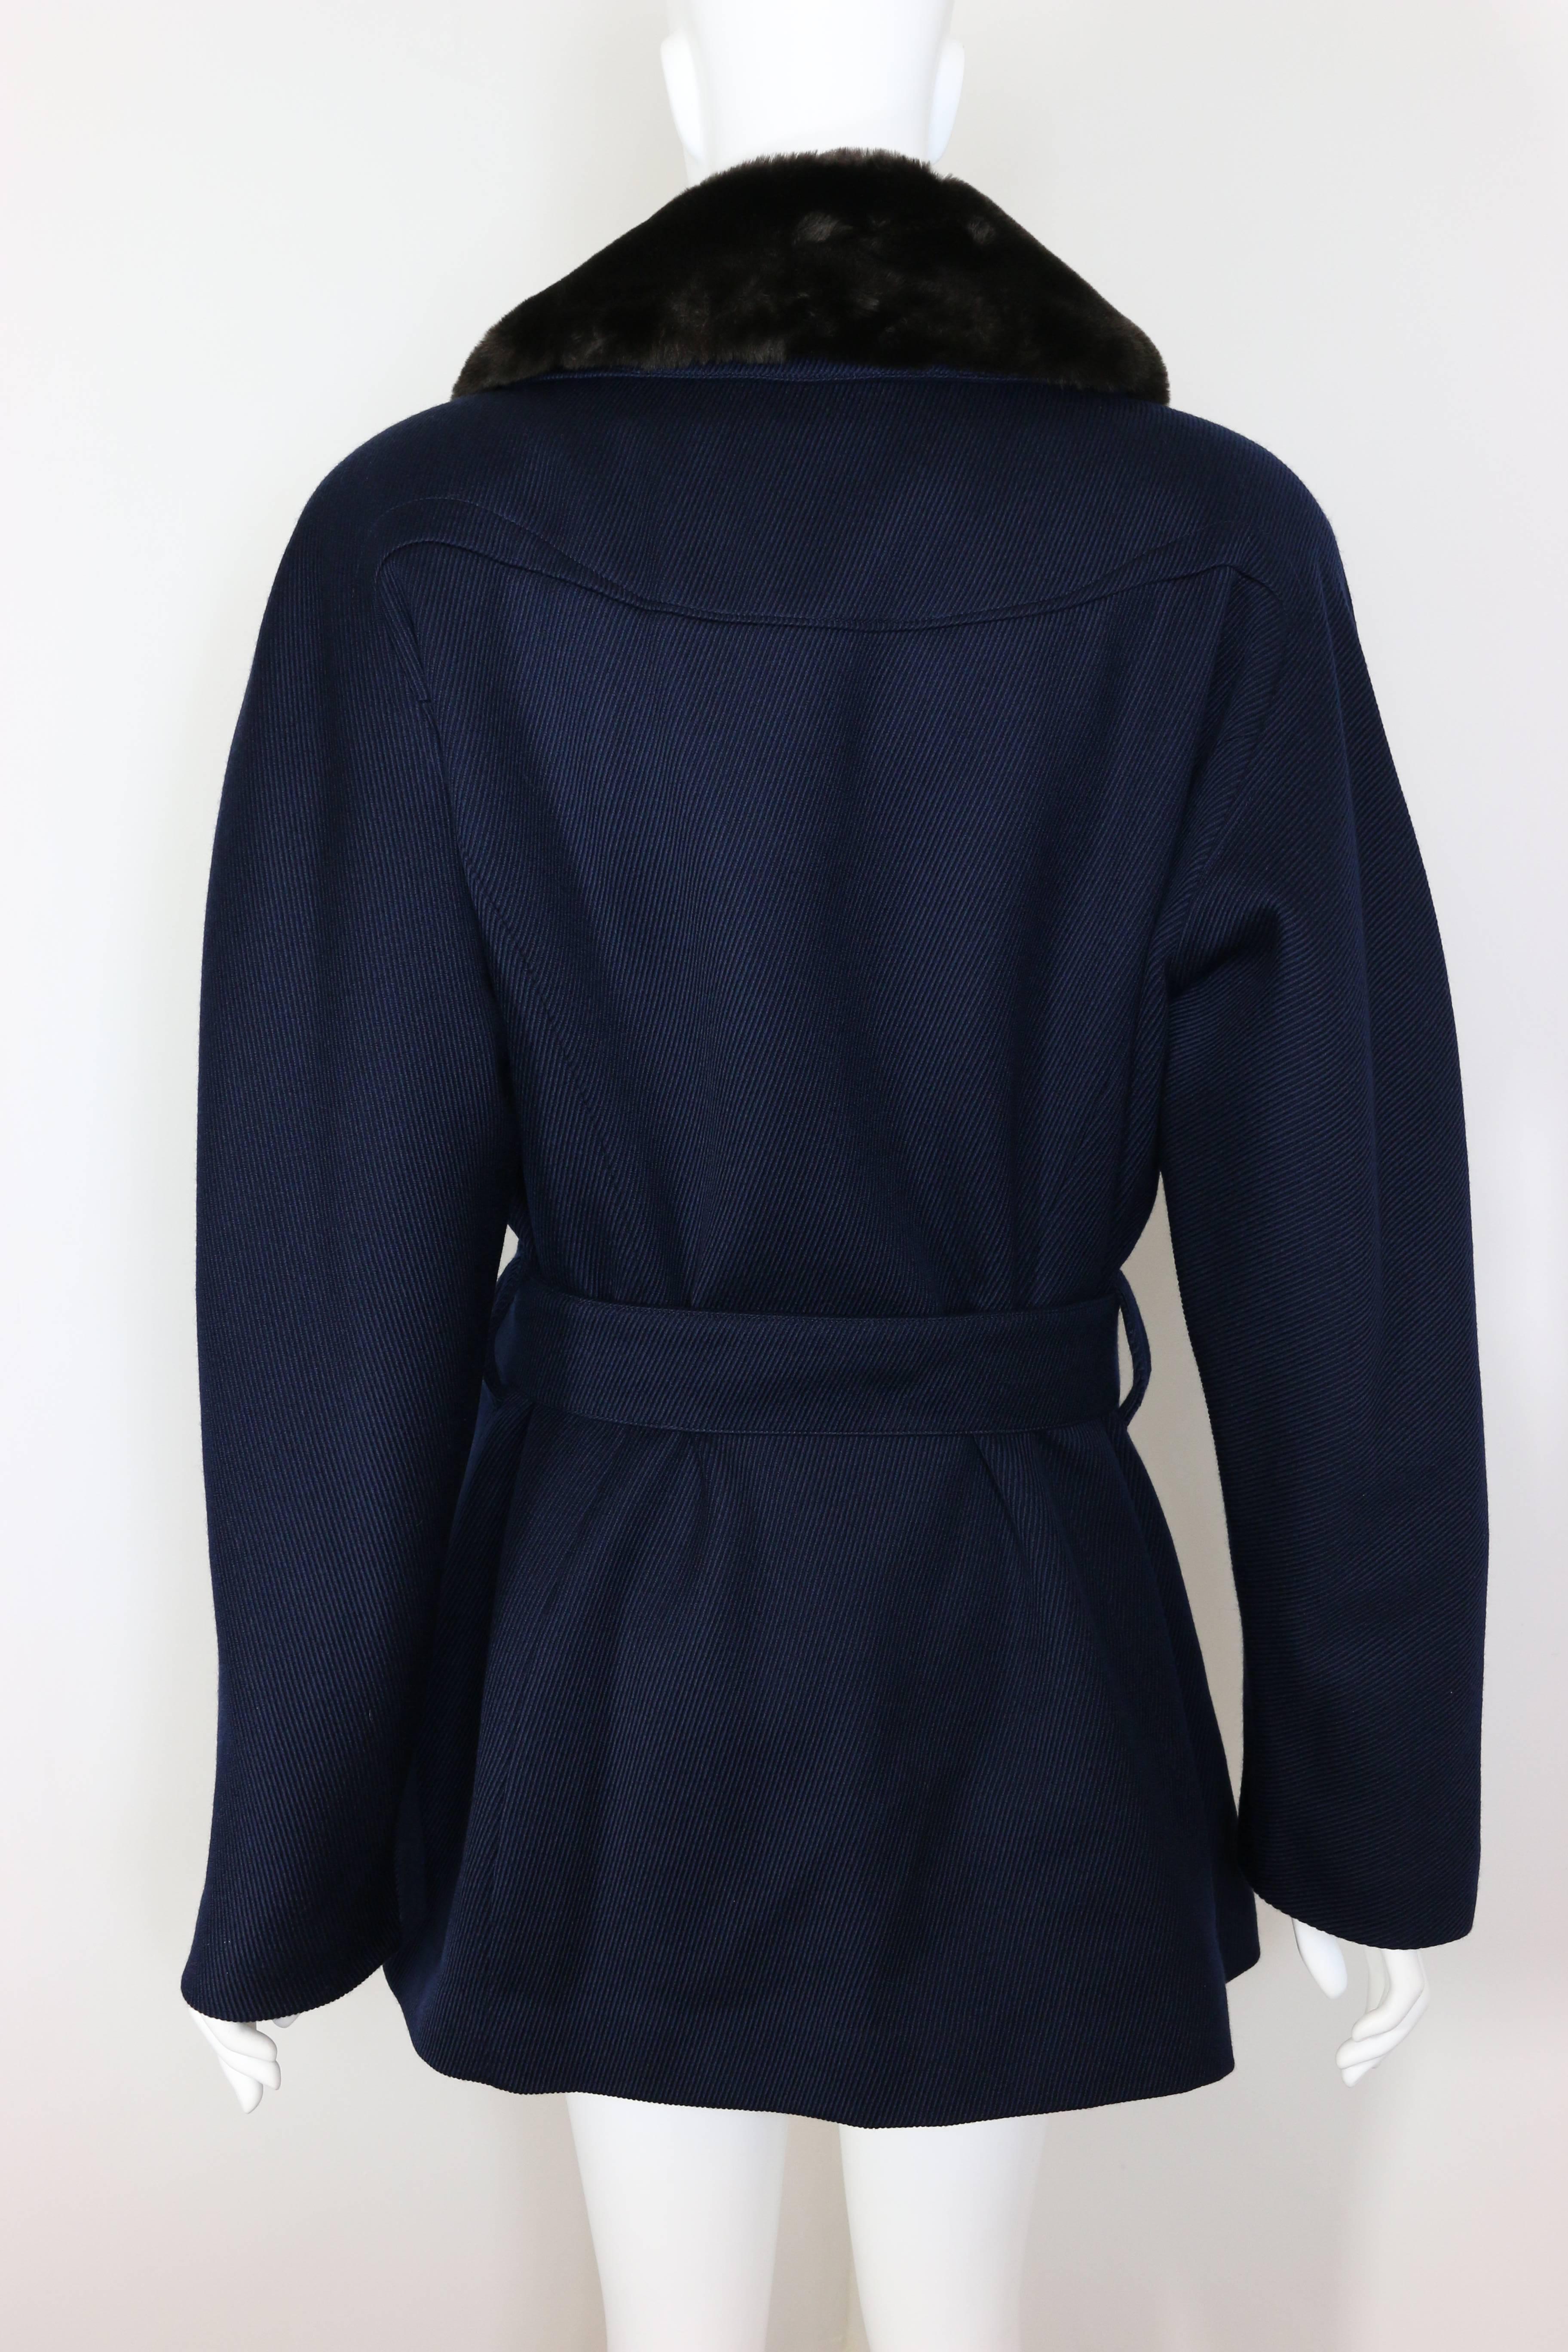 - Vintage 90s Thierry Mugler Navy Blue Faux Fur Detachable Collar Double Breasted Belted Coat. Never been worn with original tag! 

- Round shoulders.  

- Featuring ten silver buttons. 

- Silver belt buckle.  

- Four front pockets.  

-